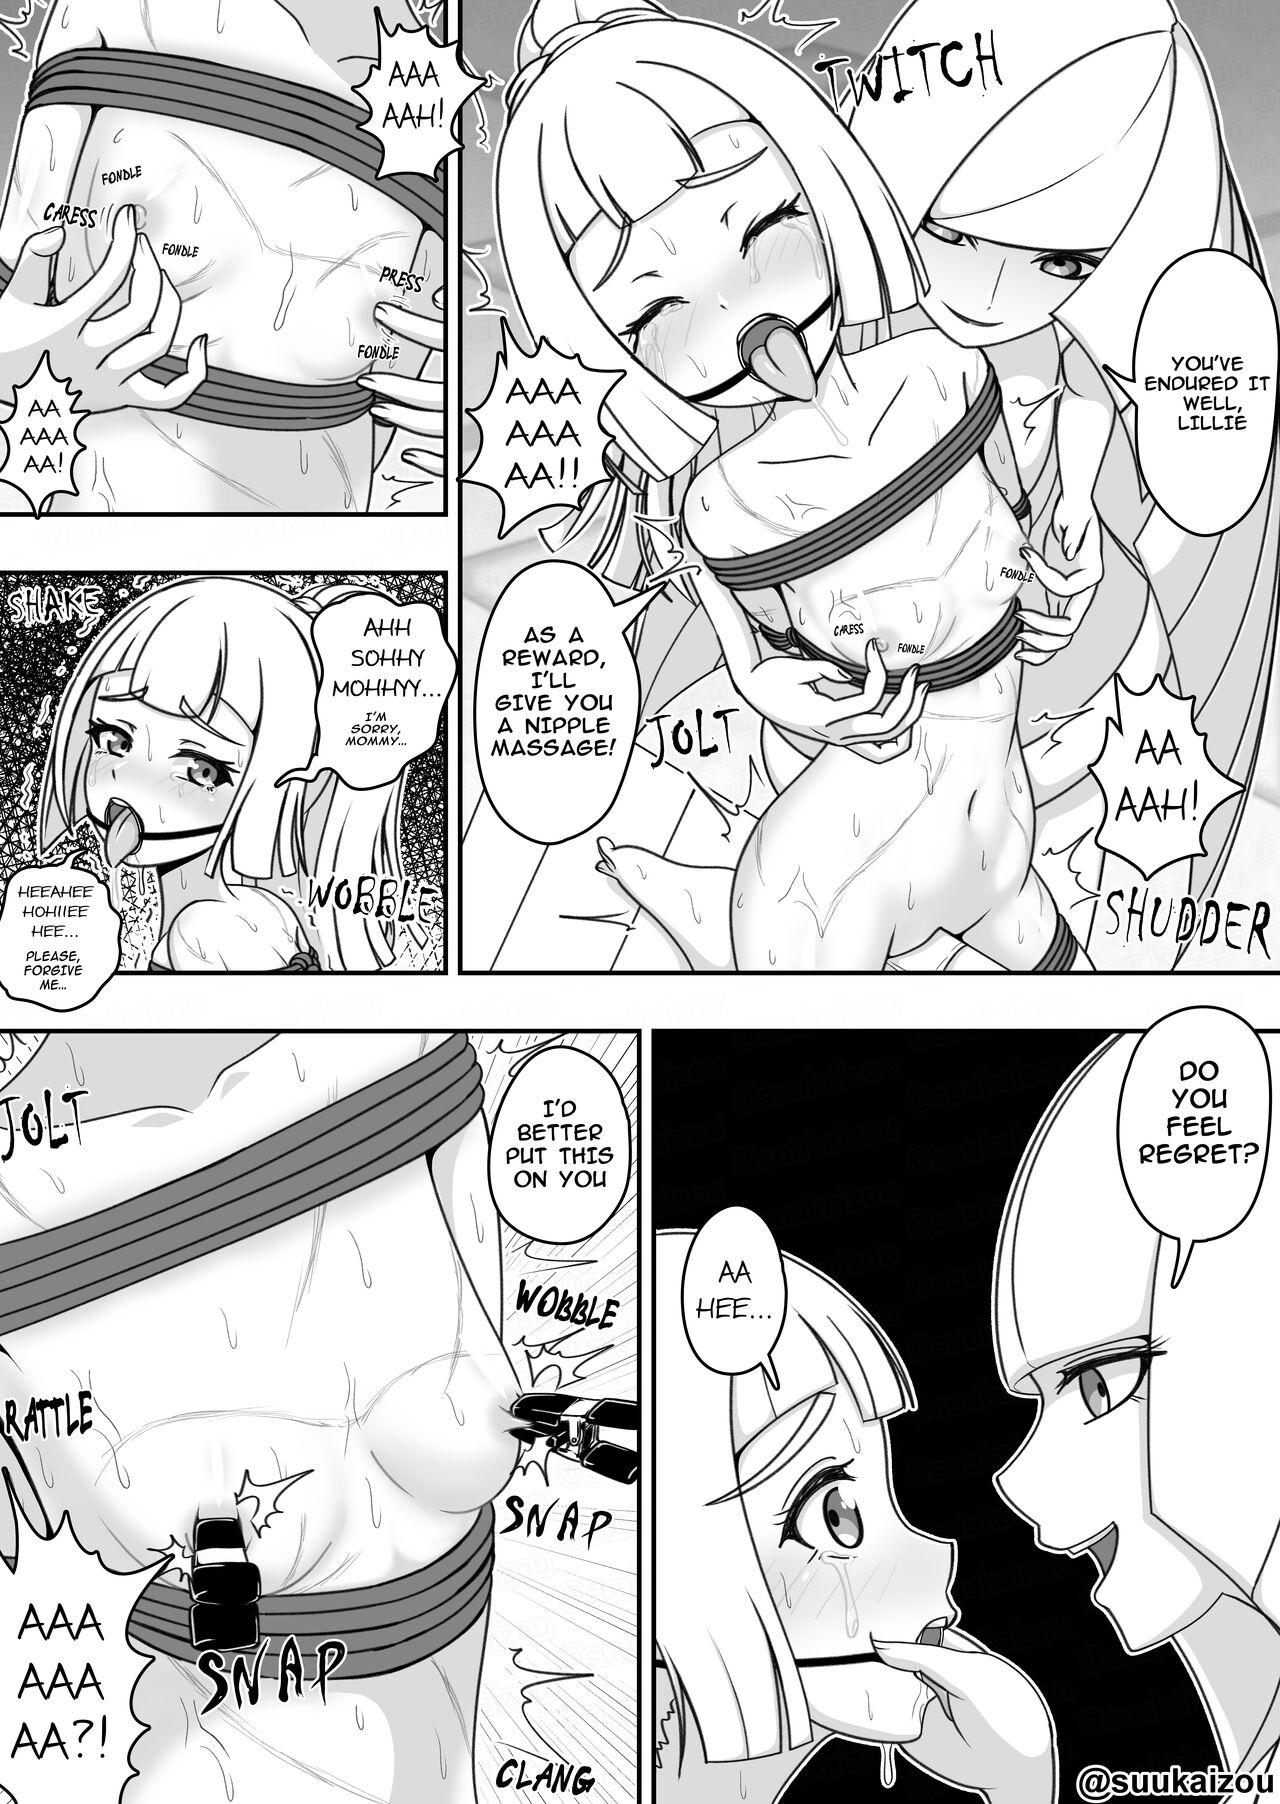 Web Lillie gets spanked by Lusamine. - Pokemon | pocket monsters Chastity - Page 6